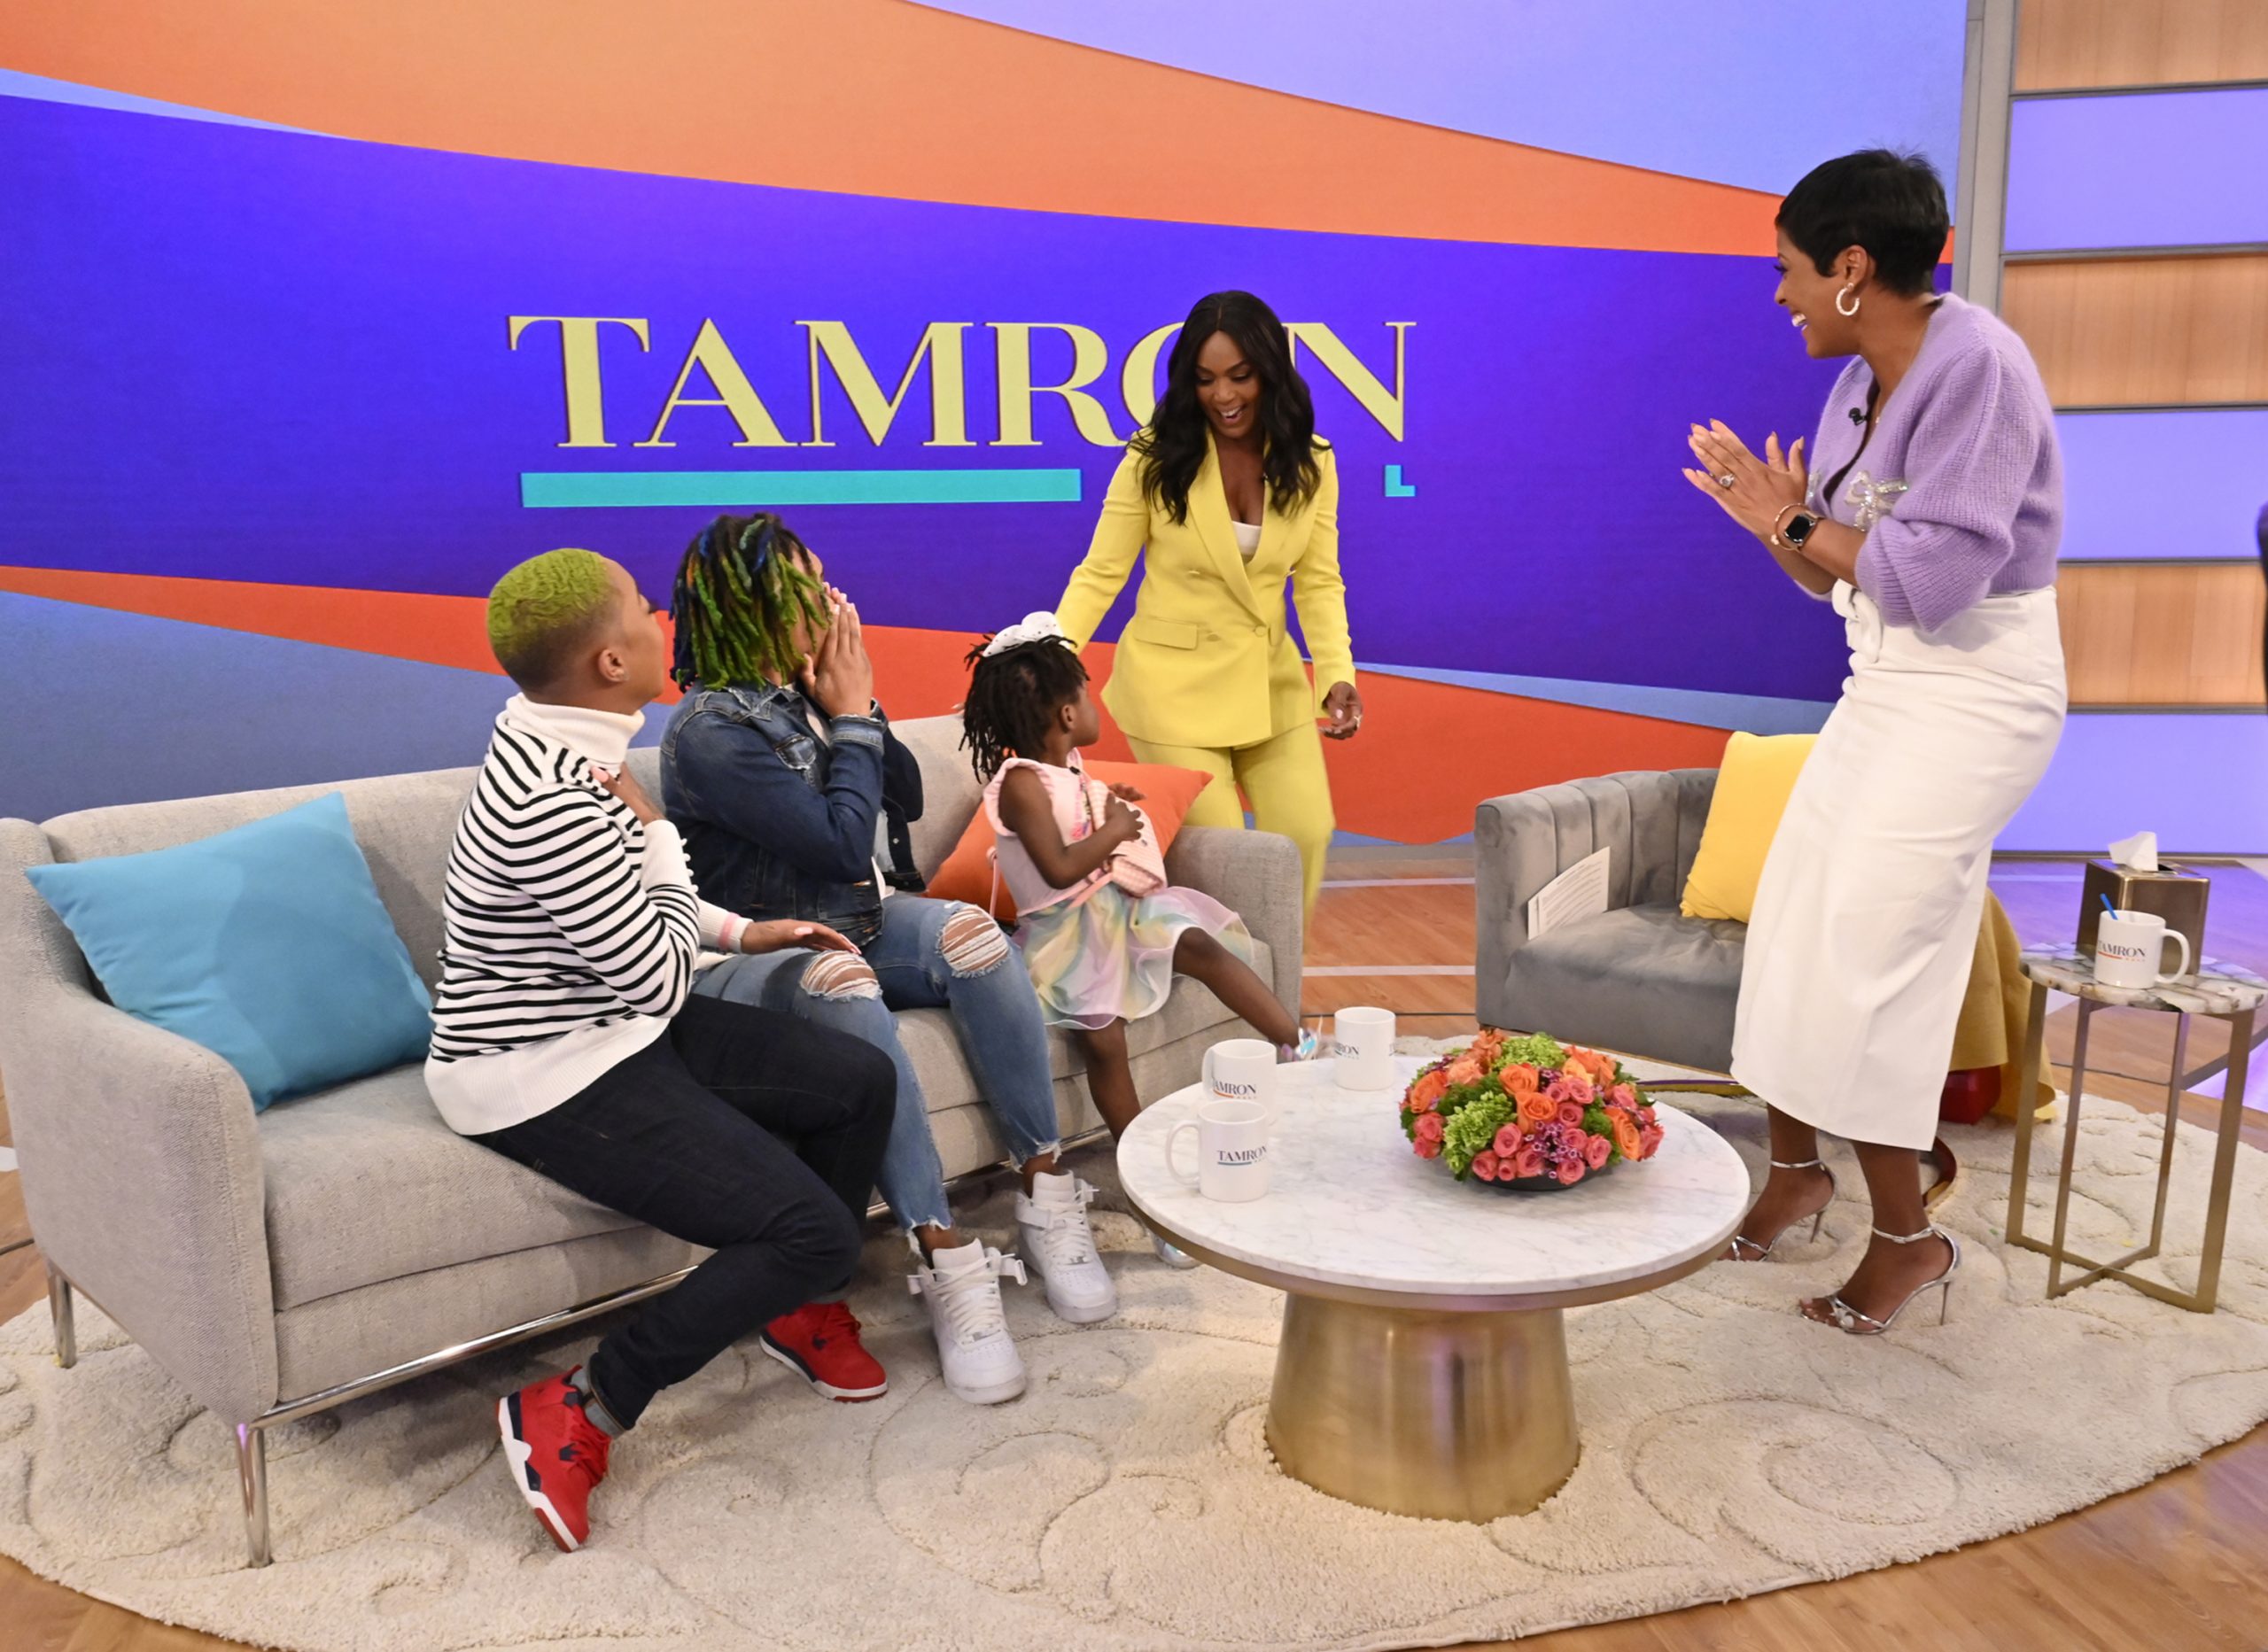 Tamron brings out actress Angela Bassett to give a special message to Shabria and Ashante